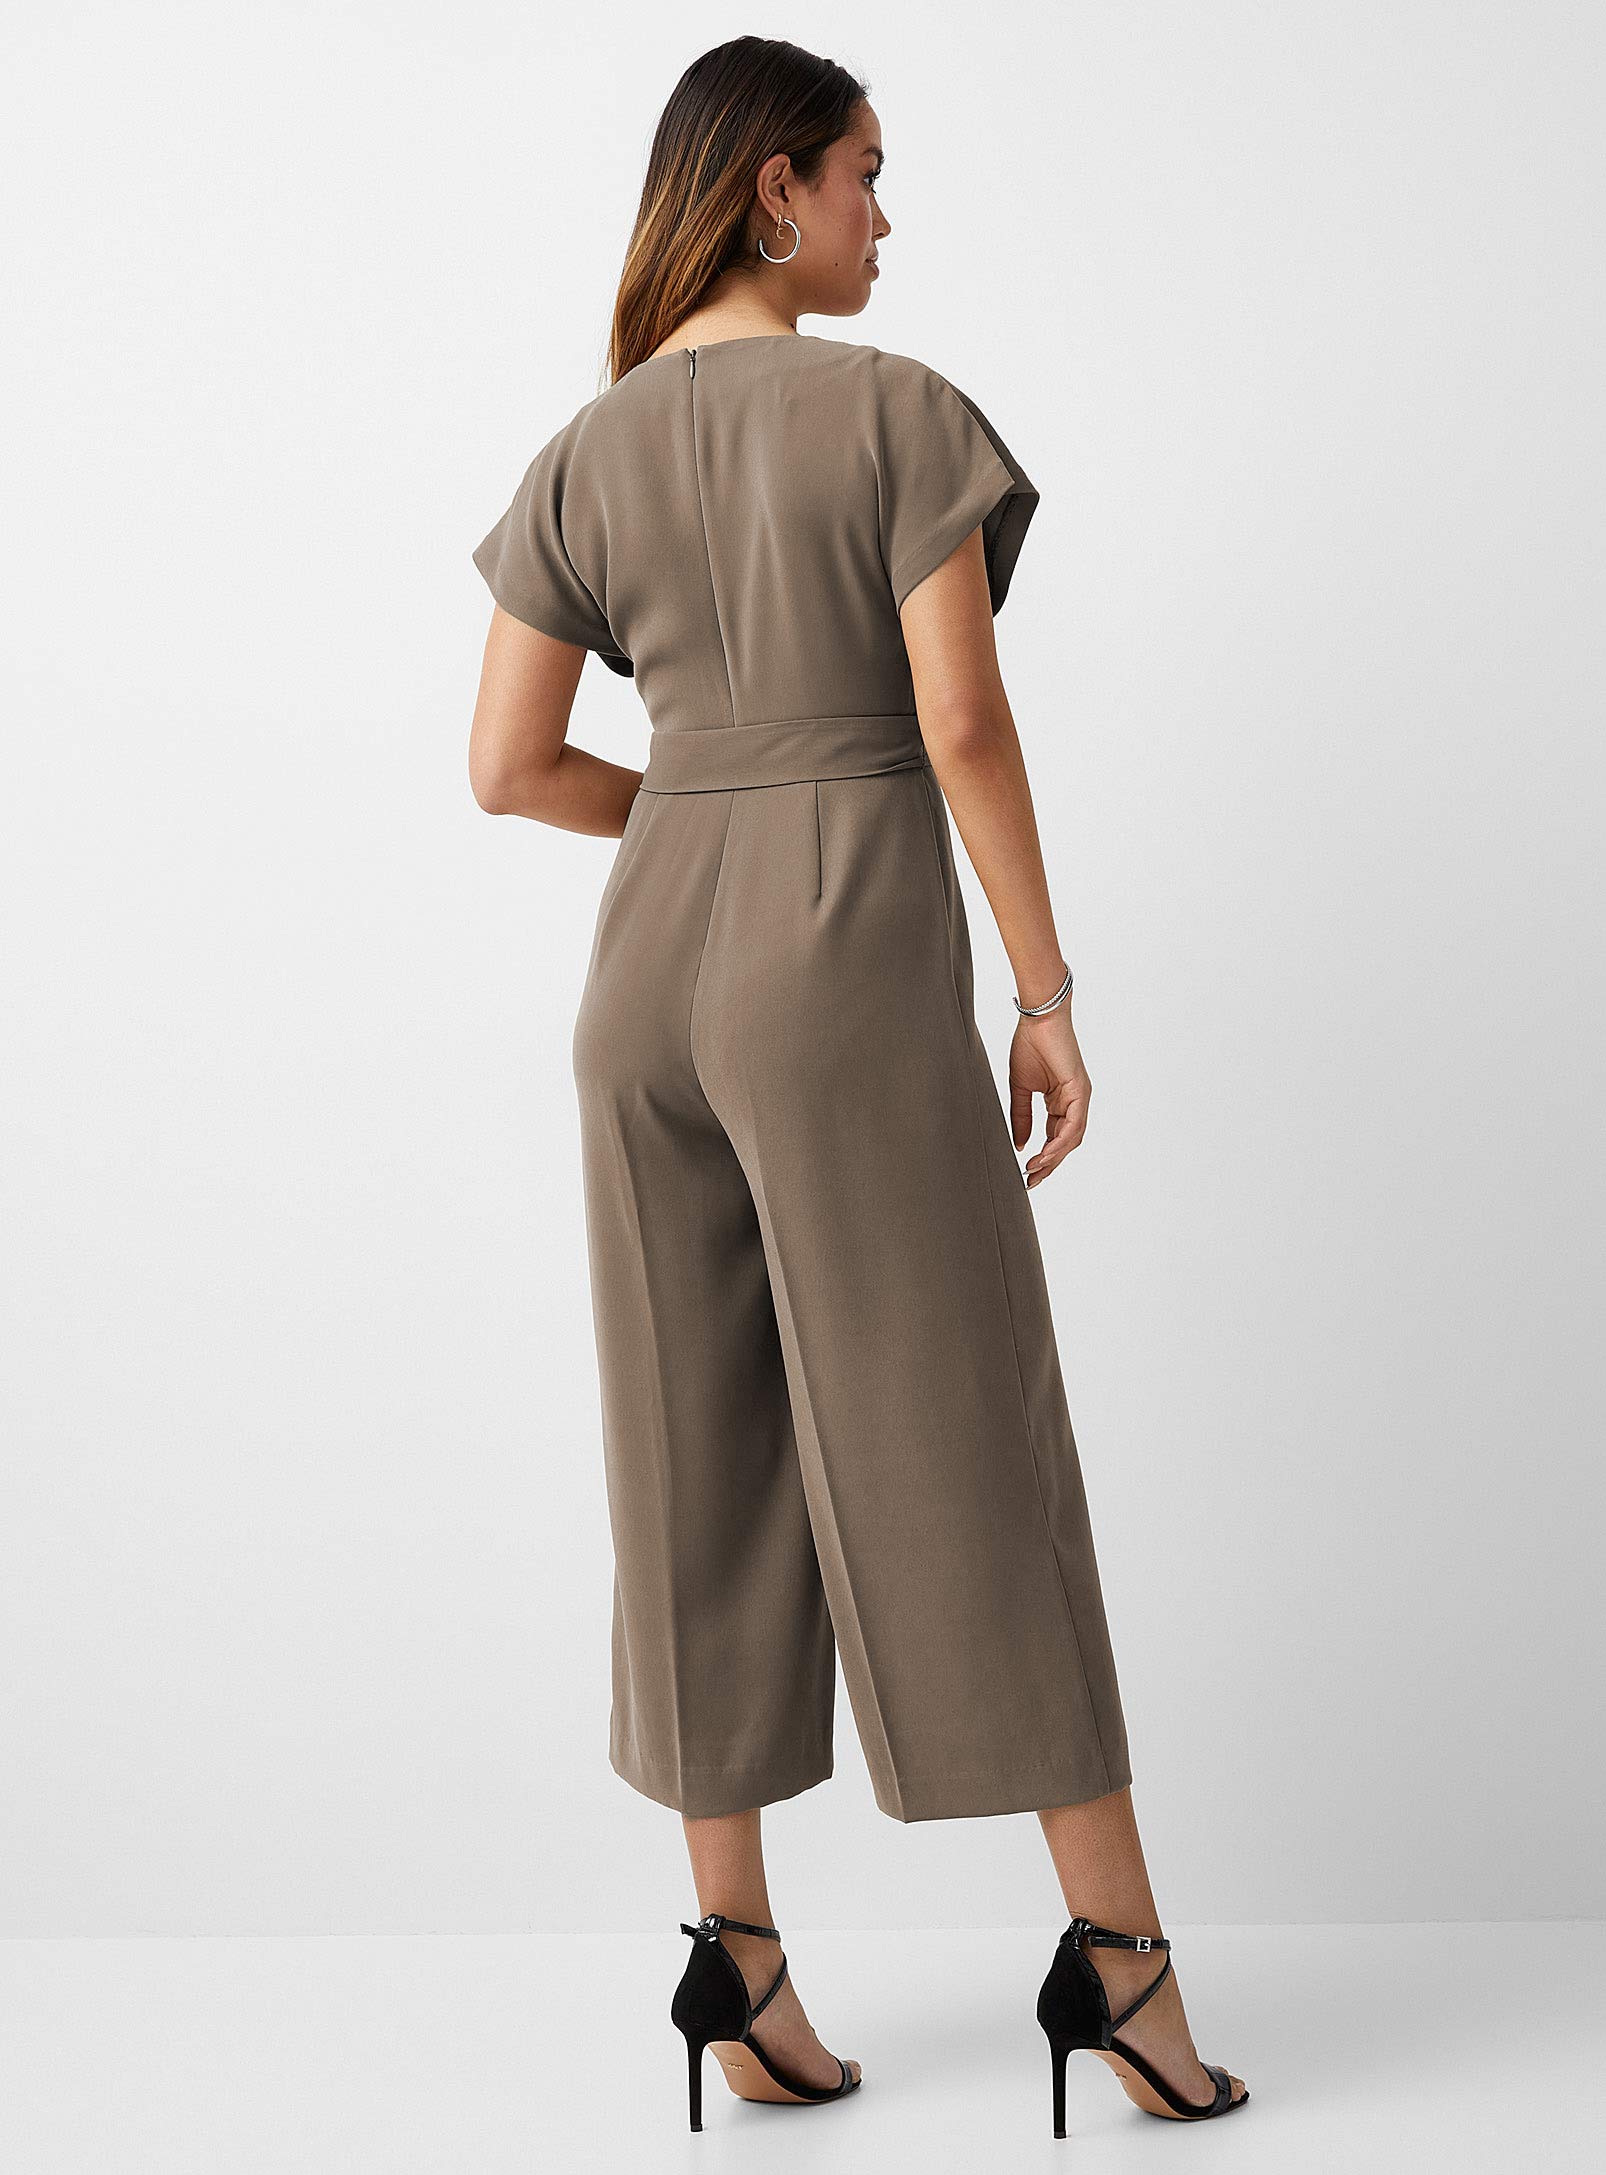 Fashion-forward woman showcasing a taupe jumpsuit with a flattering V-neckline and short sleeves. The outfit is cinched at the waist with a tie belt, leading into wide-legged cropped pants, creating a sleek silhouette